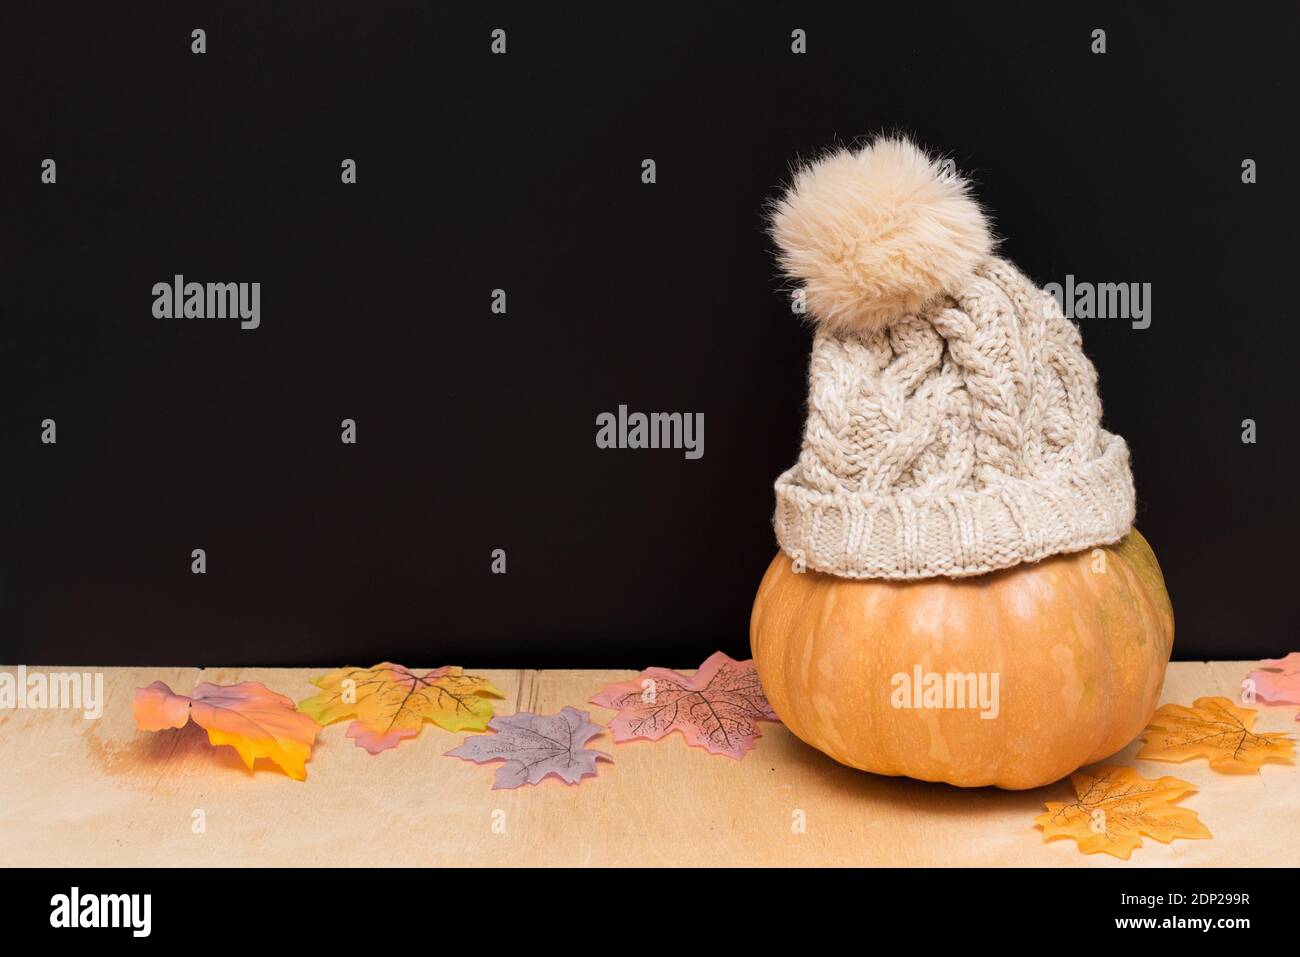 Halloween background with funny orange pumpkin in hat with autumn colorful leaves. Happy Halloween celebration card Stock Photo